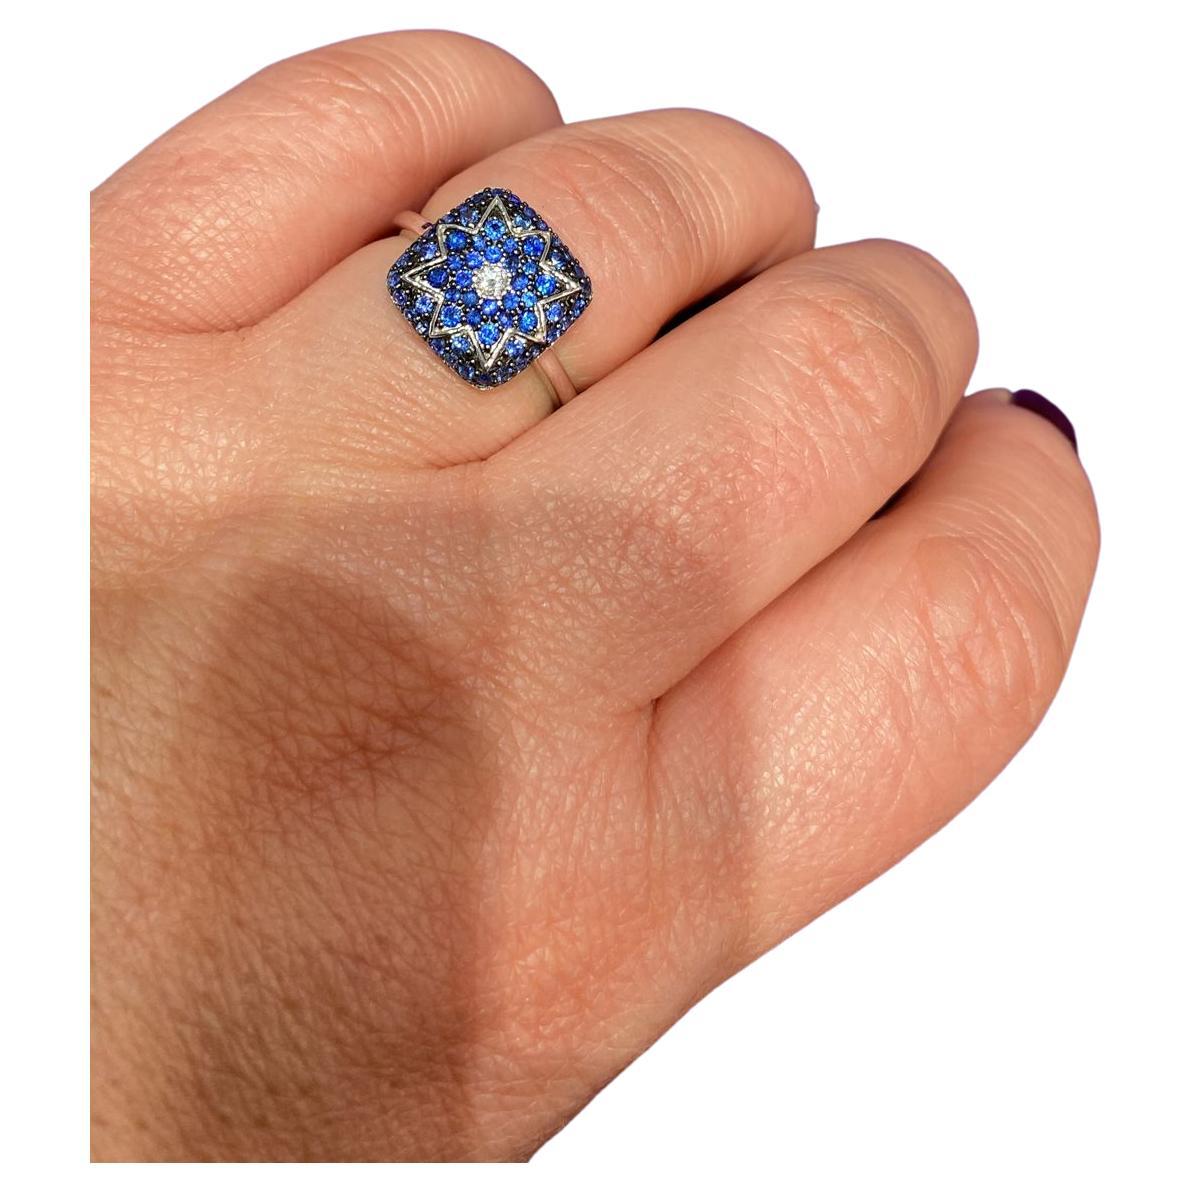 White Gold 14K Ring 
Diamond 1-RND-0,04-G/VS1A
Blue Sapphire 60-RND-0,56 Т(4)/3C  
Weight 3,32 grams
Size US 7

It is our honor to create fine jewelry, and it’s for that reason that we choose to only work with high-quality, enduring materials that